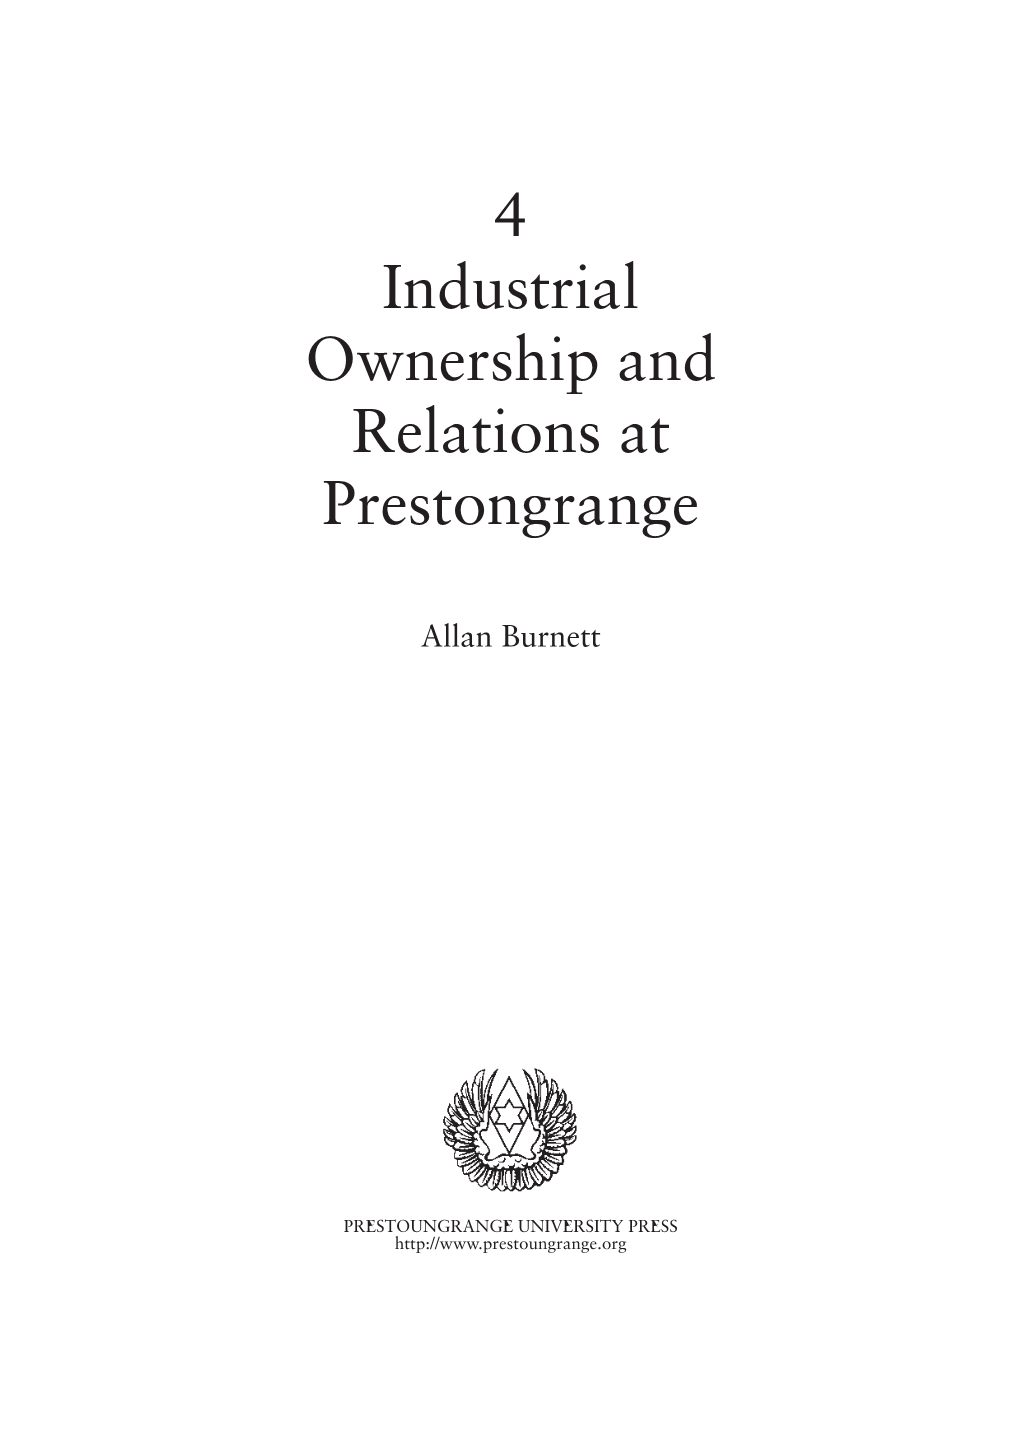 4 Industrial Ownership and Relations at Prestongrange